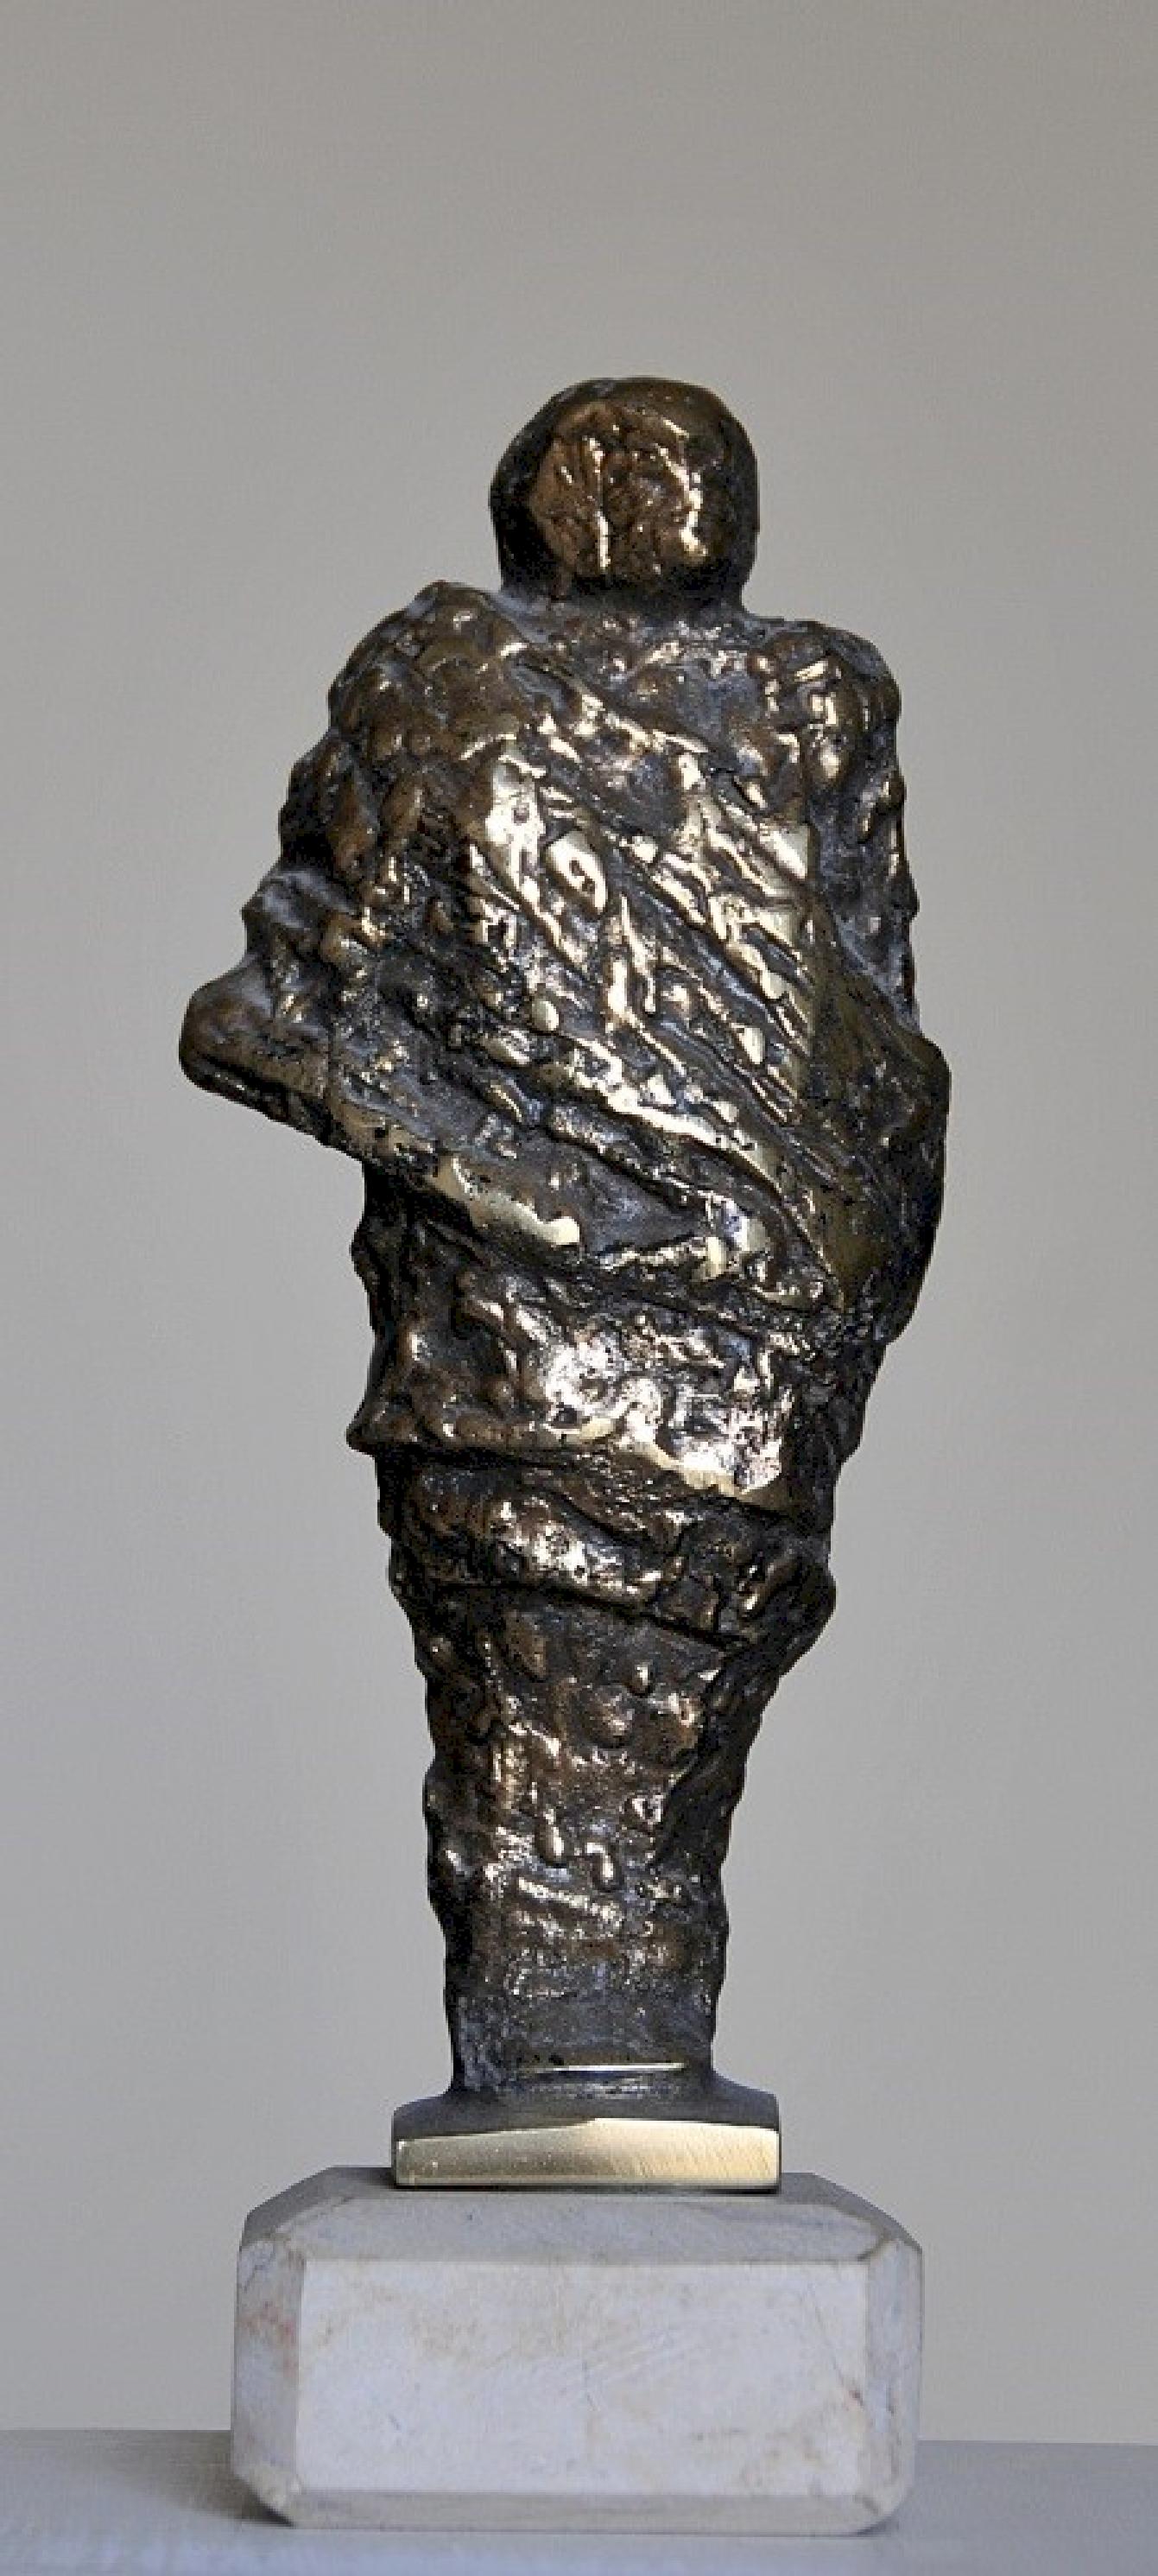 "Robed IV" Bronze Sculpture 9.5" x 4" x 3" inch by Sarkis Tossonian

Sarkis Tossoonian was born in Alexandria in 1953. He graduated from the Faculty of Fine Arts/Sculpture in 1979. He started exhibiting in individual and group exhibitions in